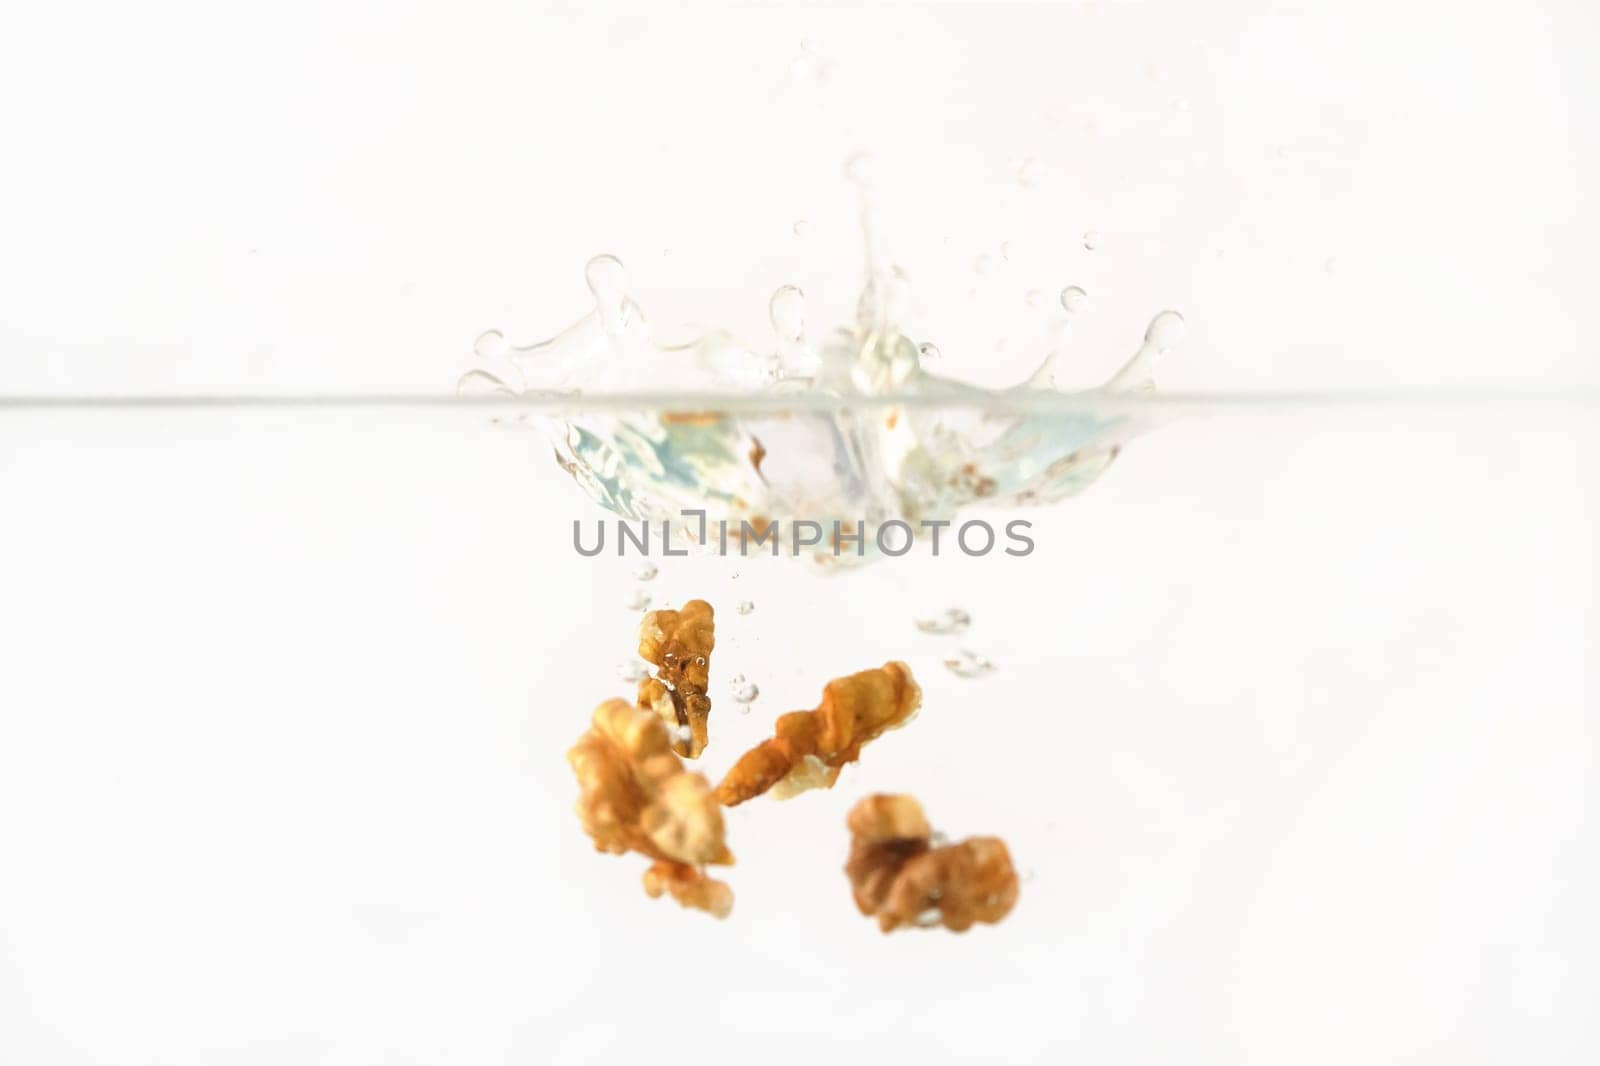 Walnut kernels dropped into water aquarium tank, high speed photo, white background by Ivanko